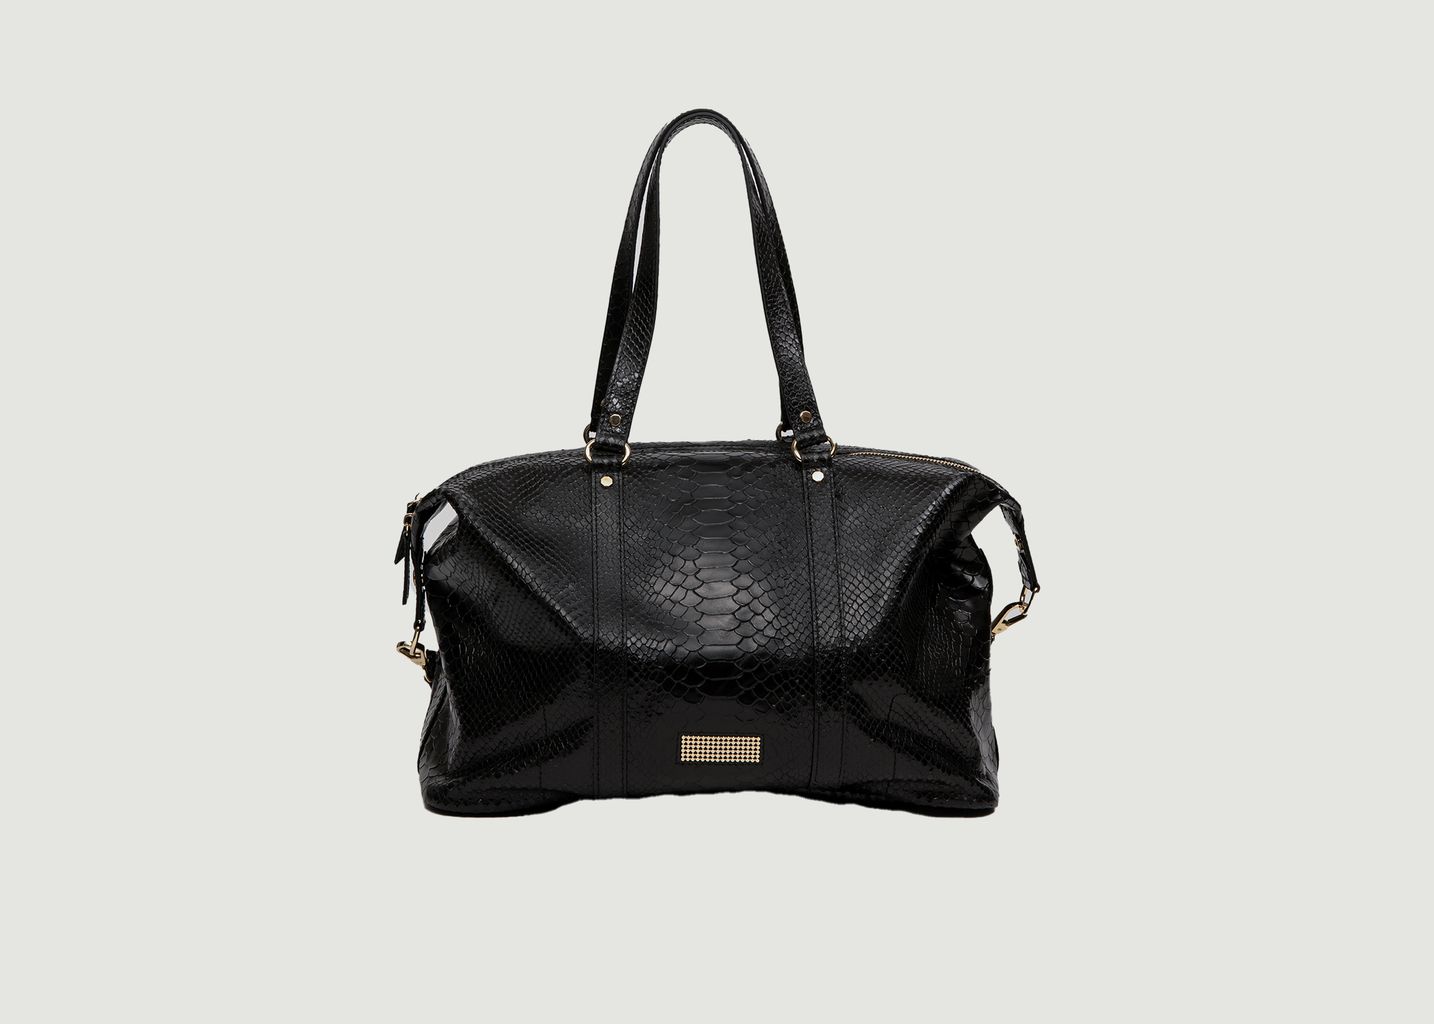 Momos python effect leather large tote bag - Clio Goldbrenner